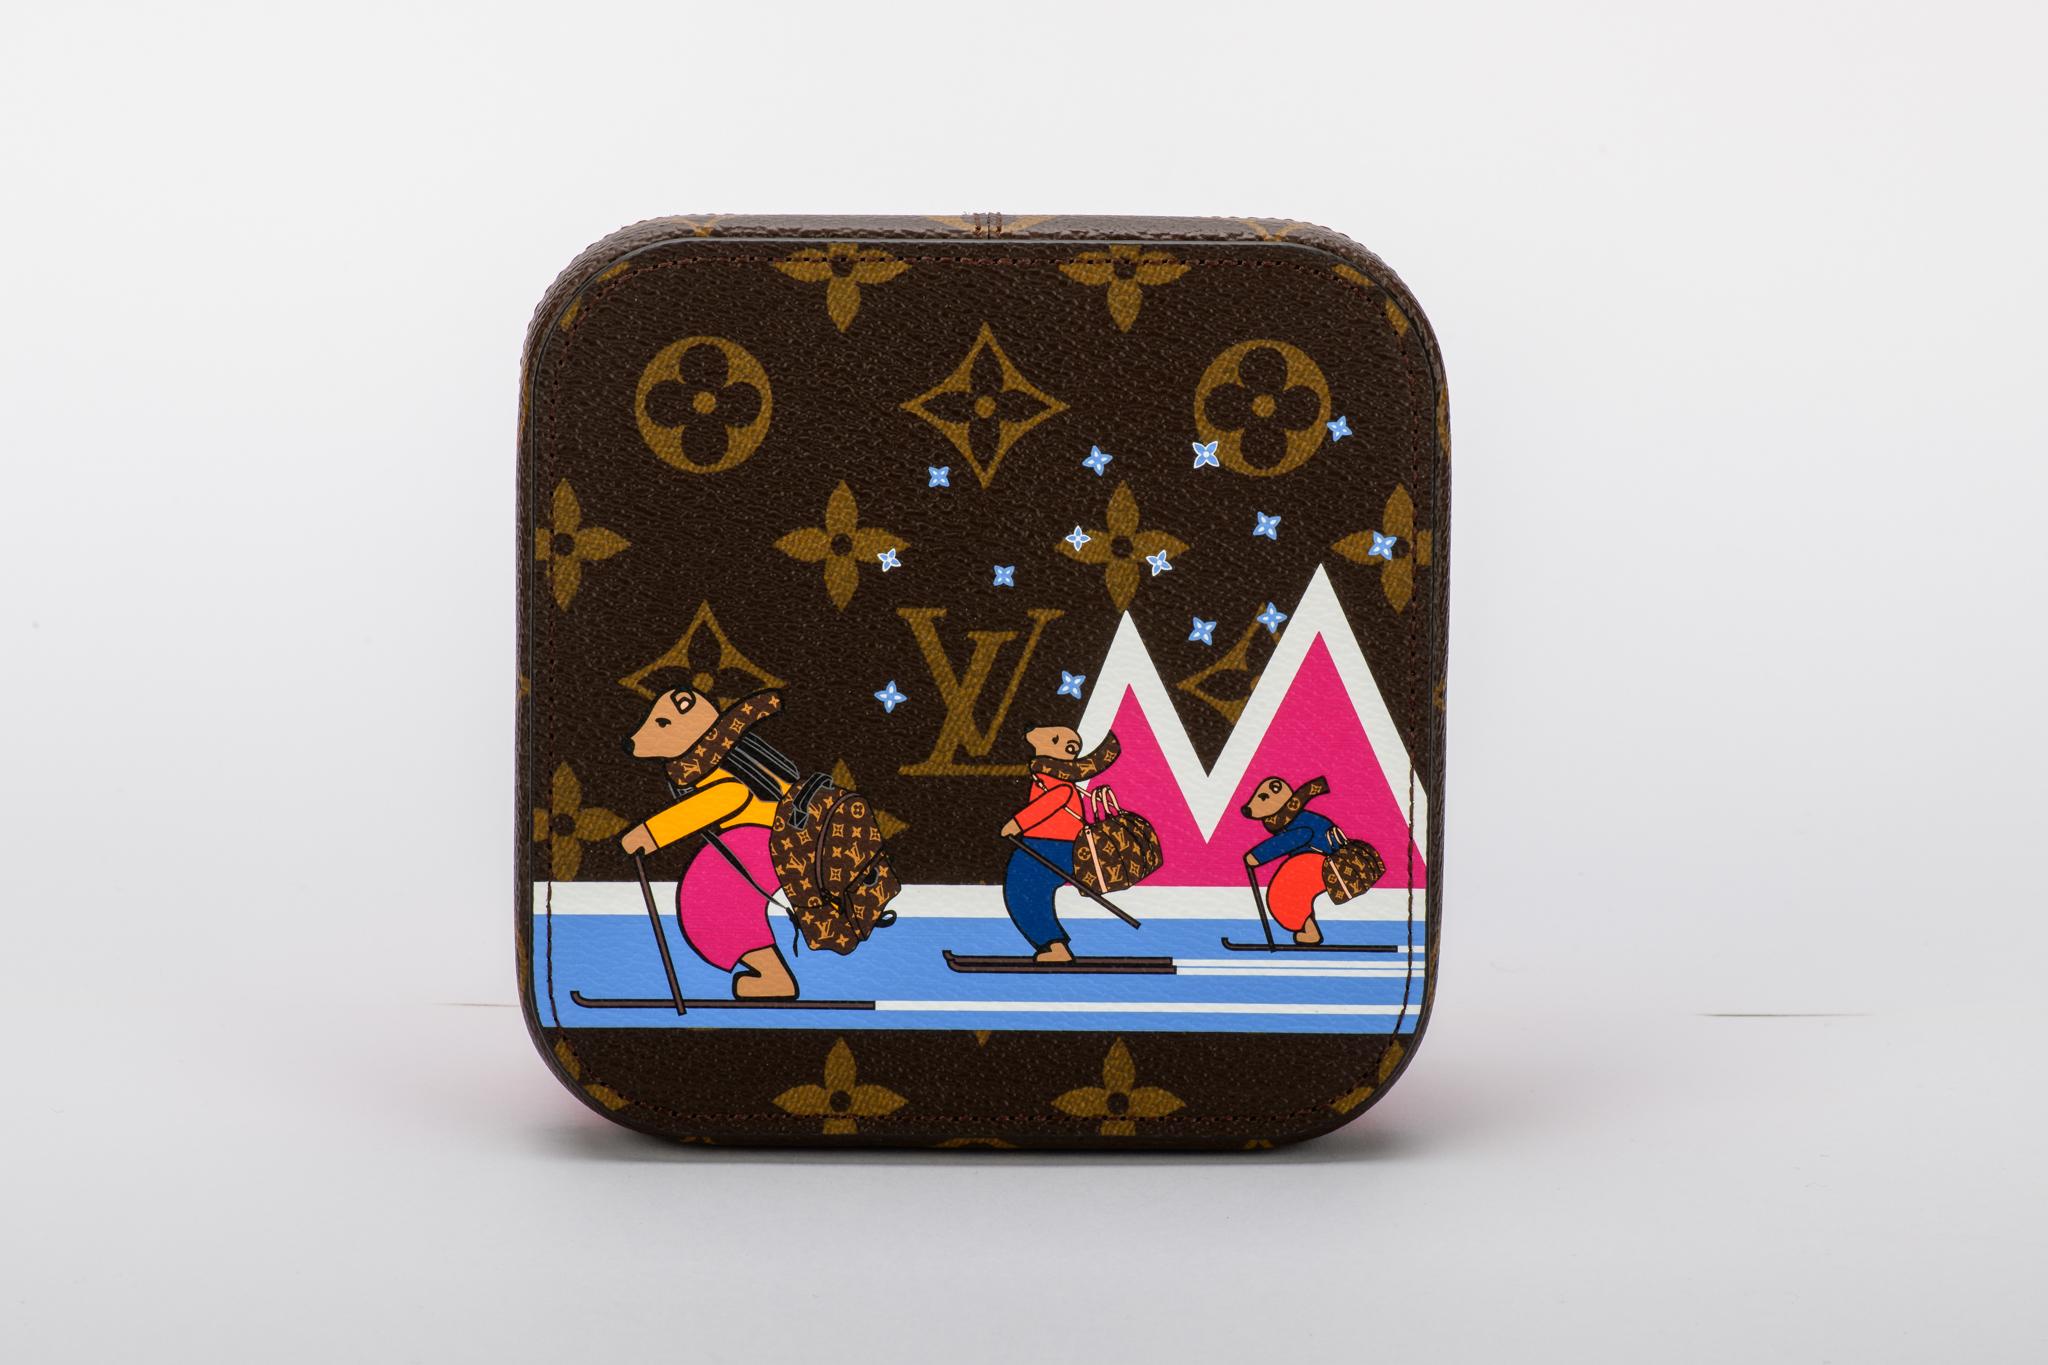 Louis Vuitton Christmas 2018 limited edition skiing bears box. Monogram top and pink leather bottom. Comes with original dust cover and box.
